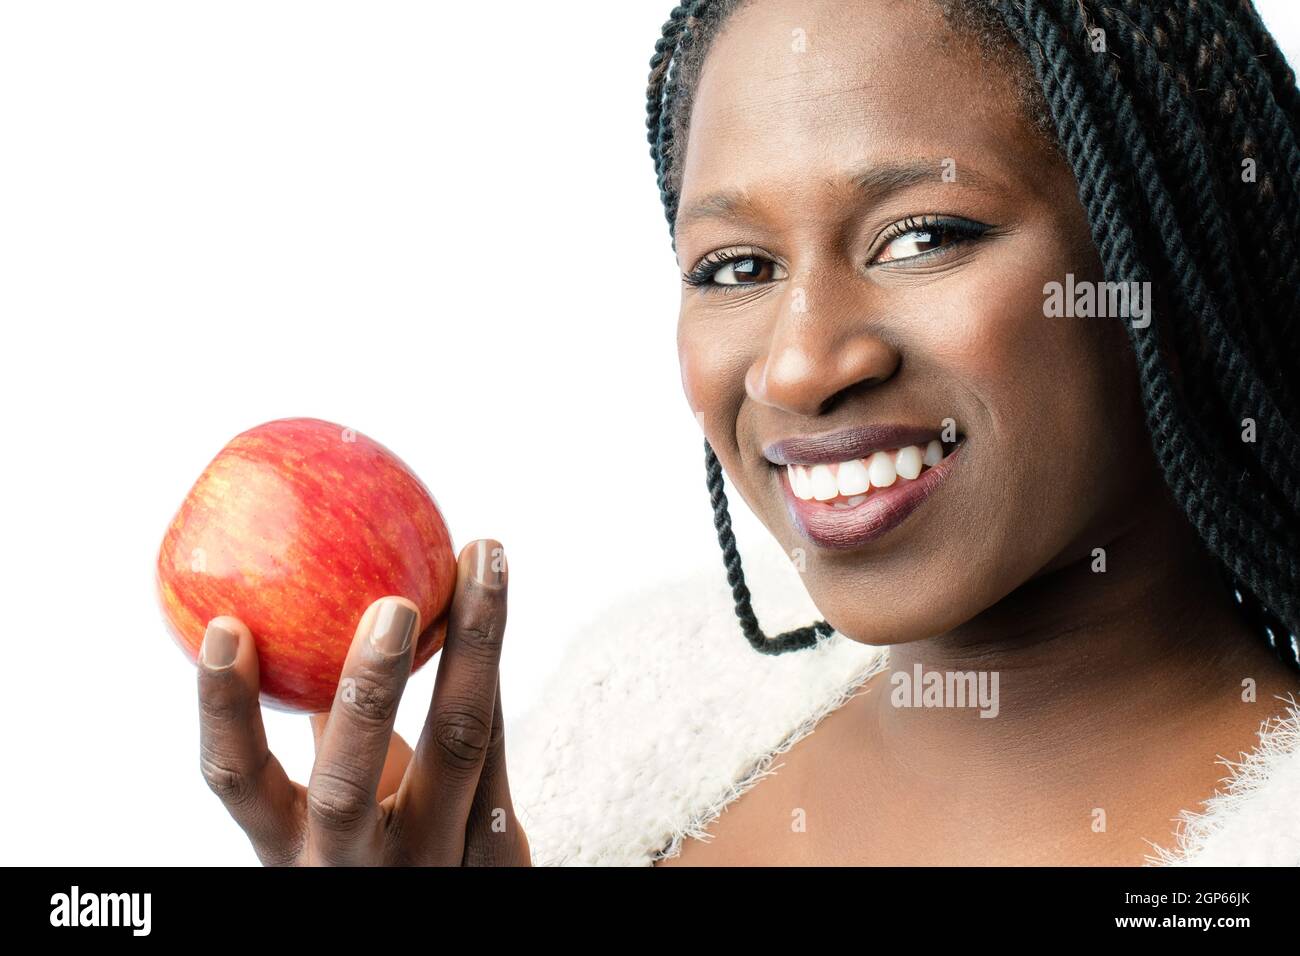 Macro close up of attractive african girl with toothy smile holding red apple. Isolated on white background. Stock Photo